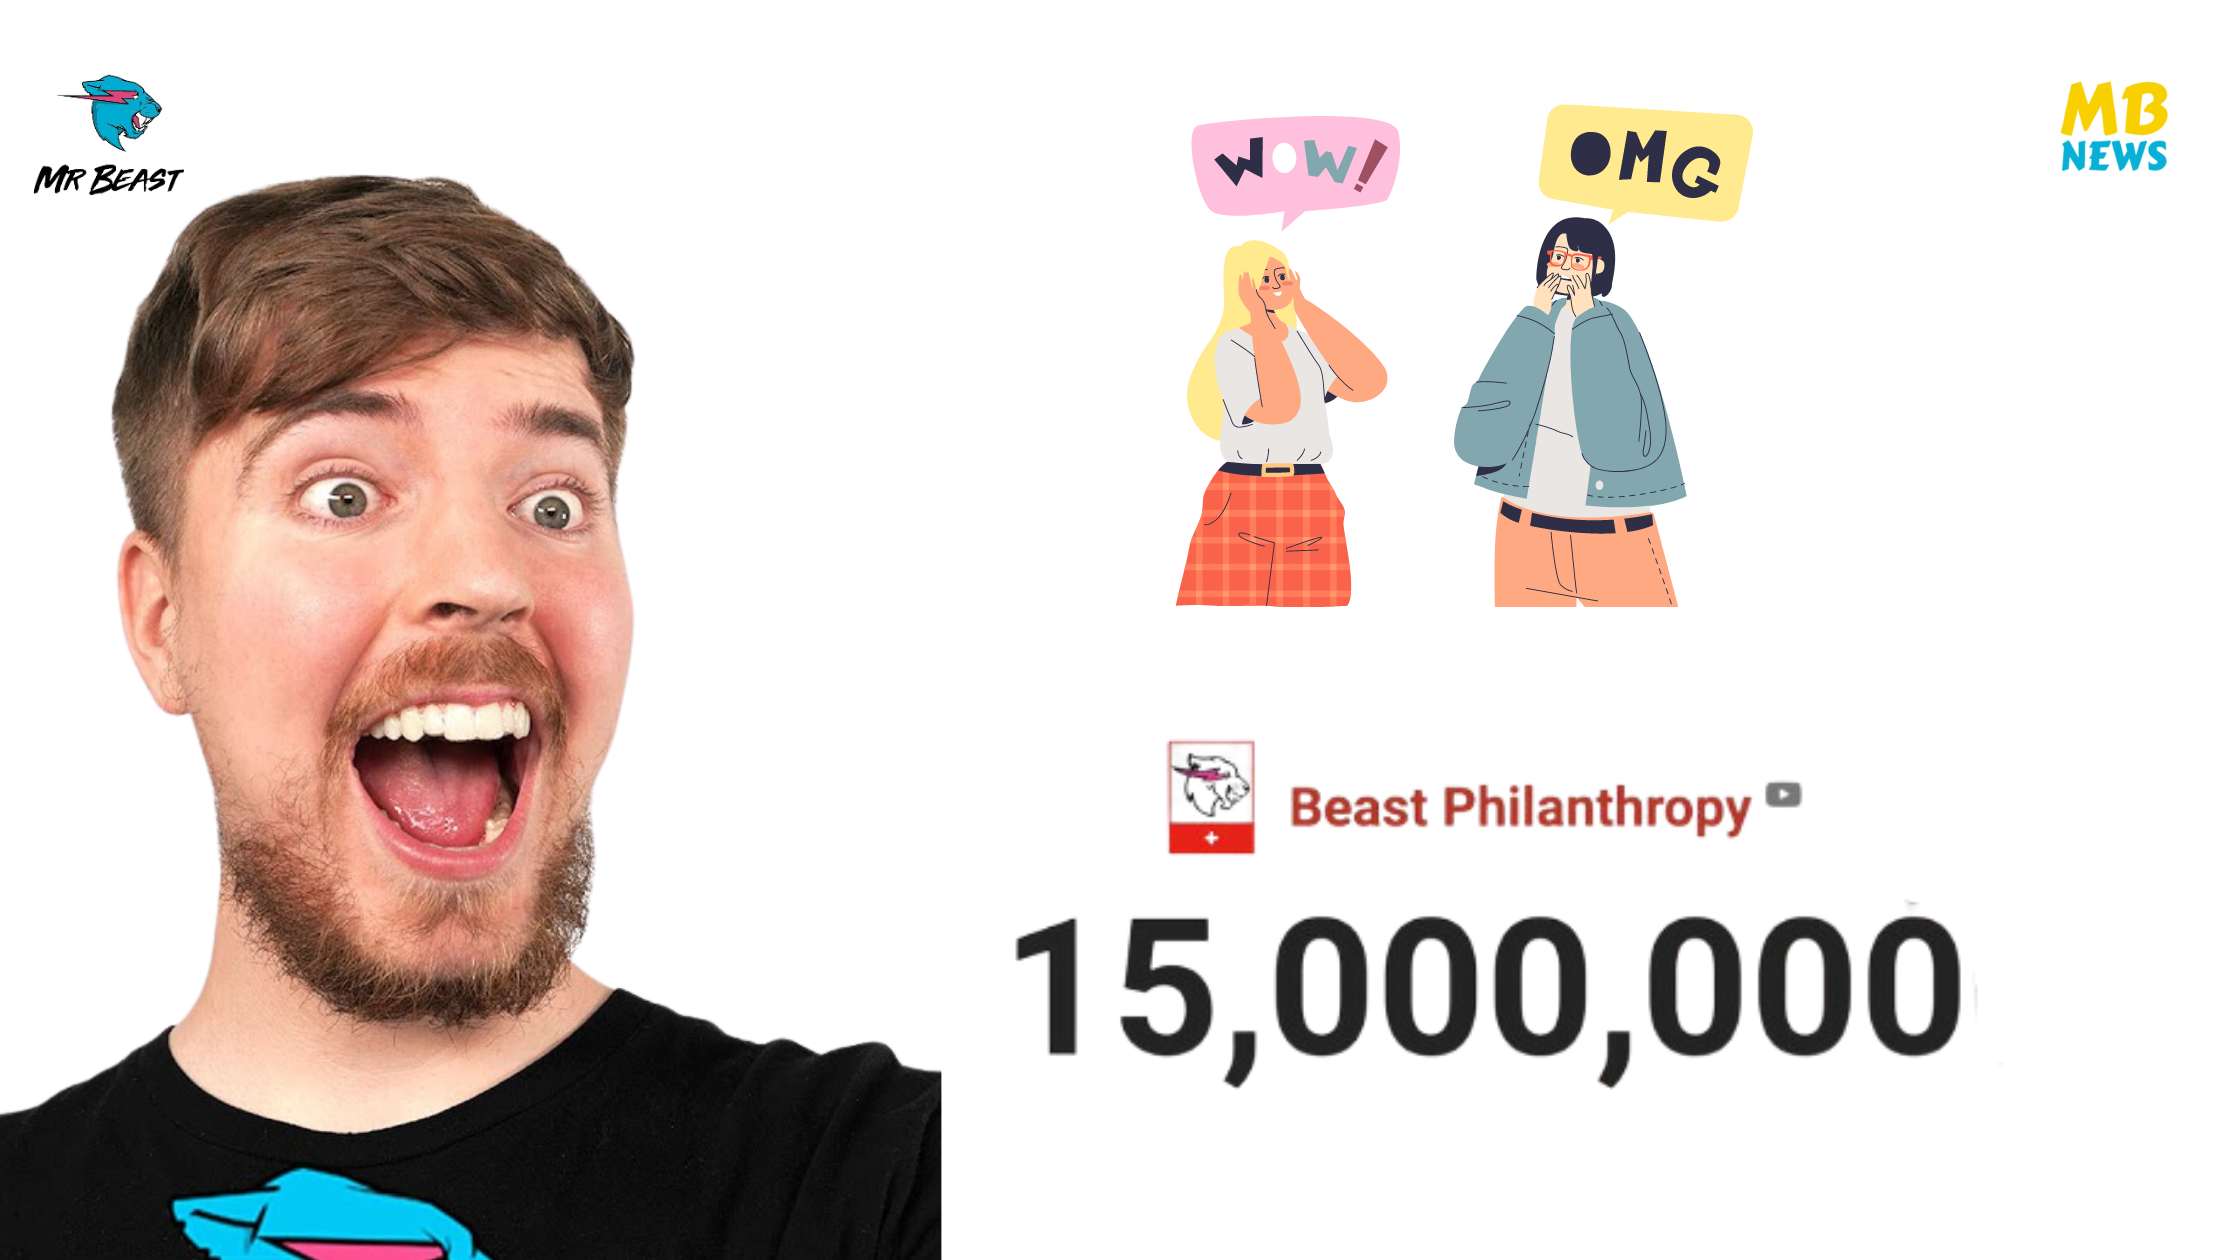 MrBeast's Youtube Channel, "Beast Philanthropy," Achieves Remarkable Milestone: 15 Million Subscribers in Just One Month!